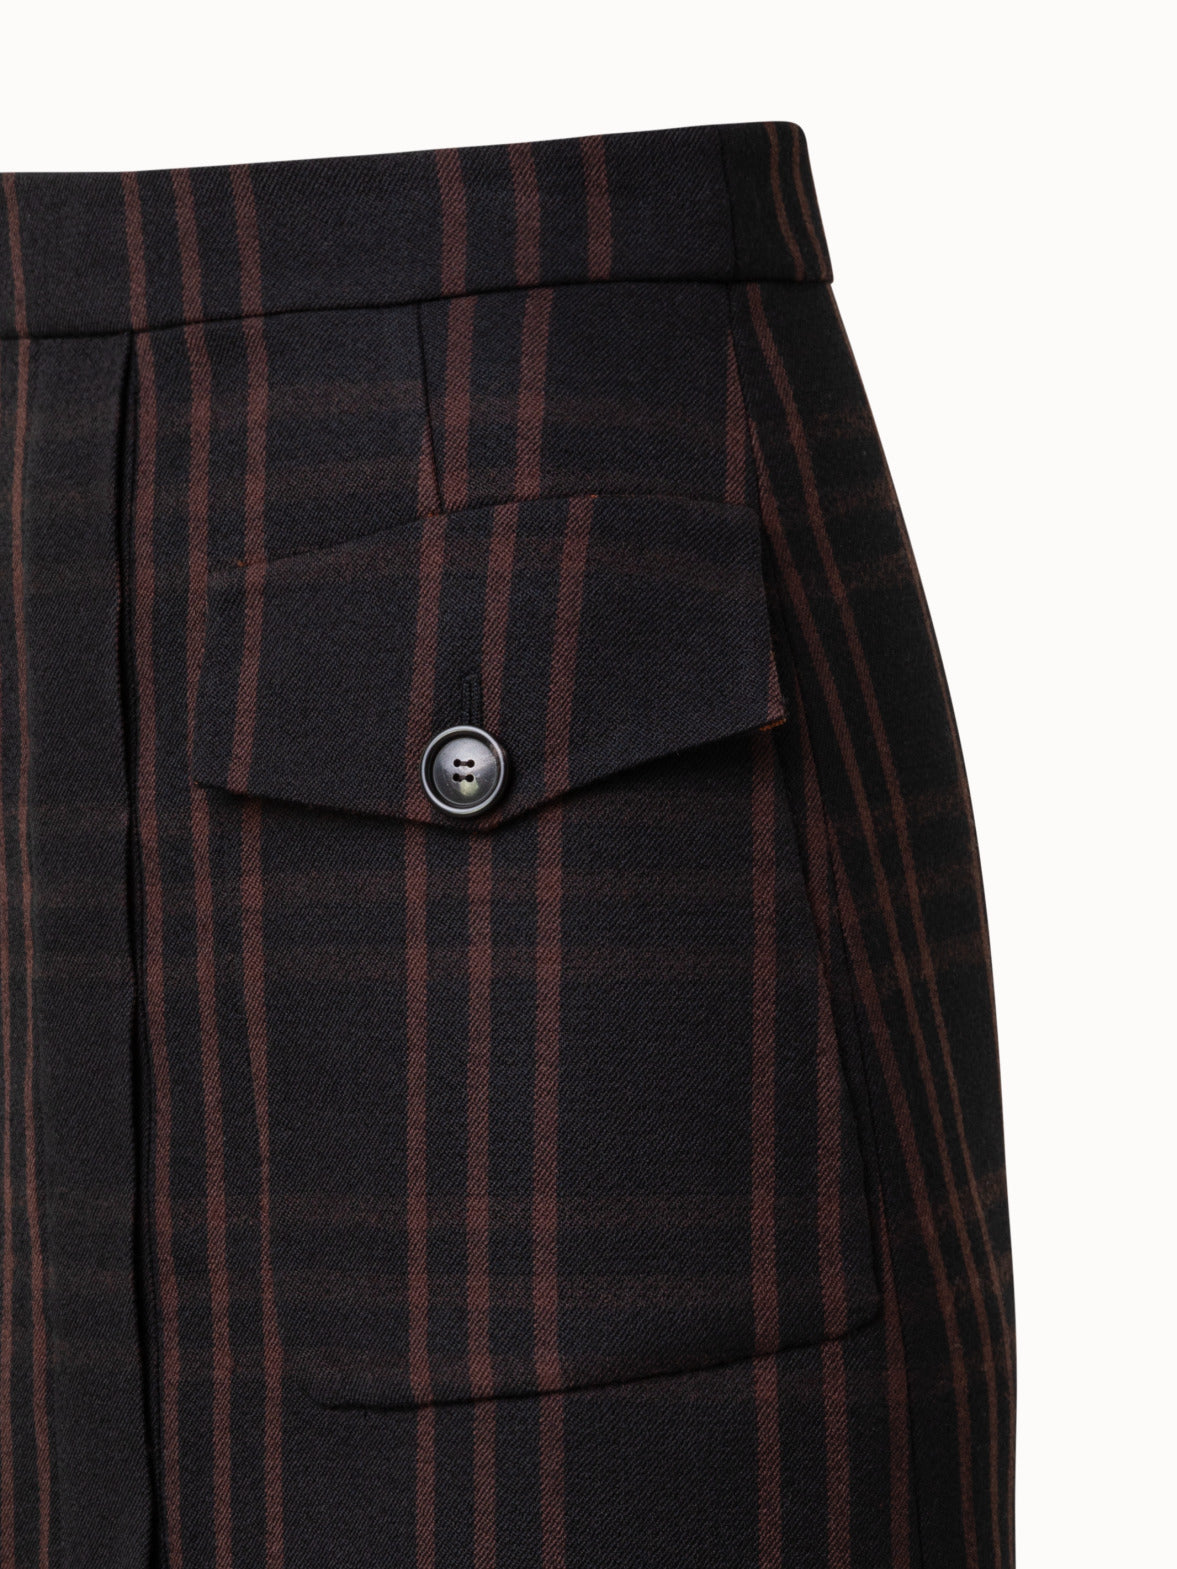 Wool Double-Weave Short Skirt with Window Pane Check